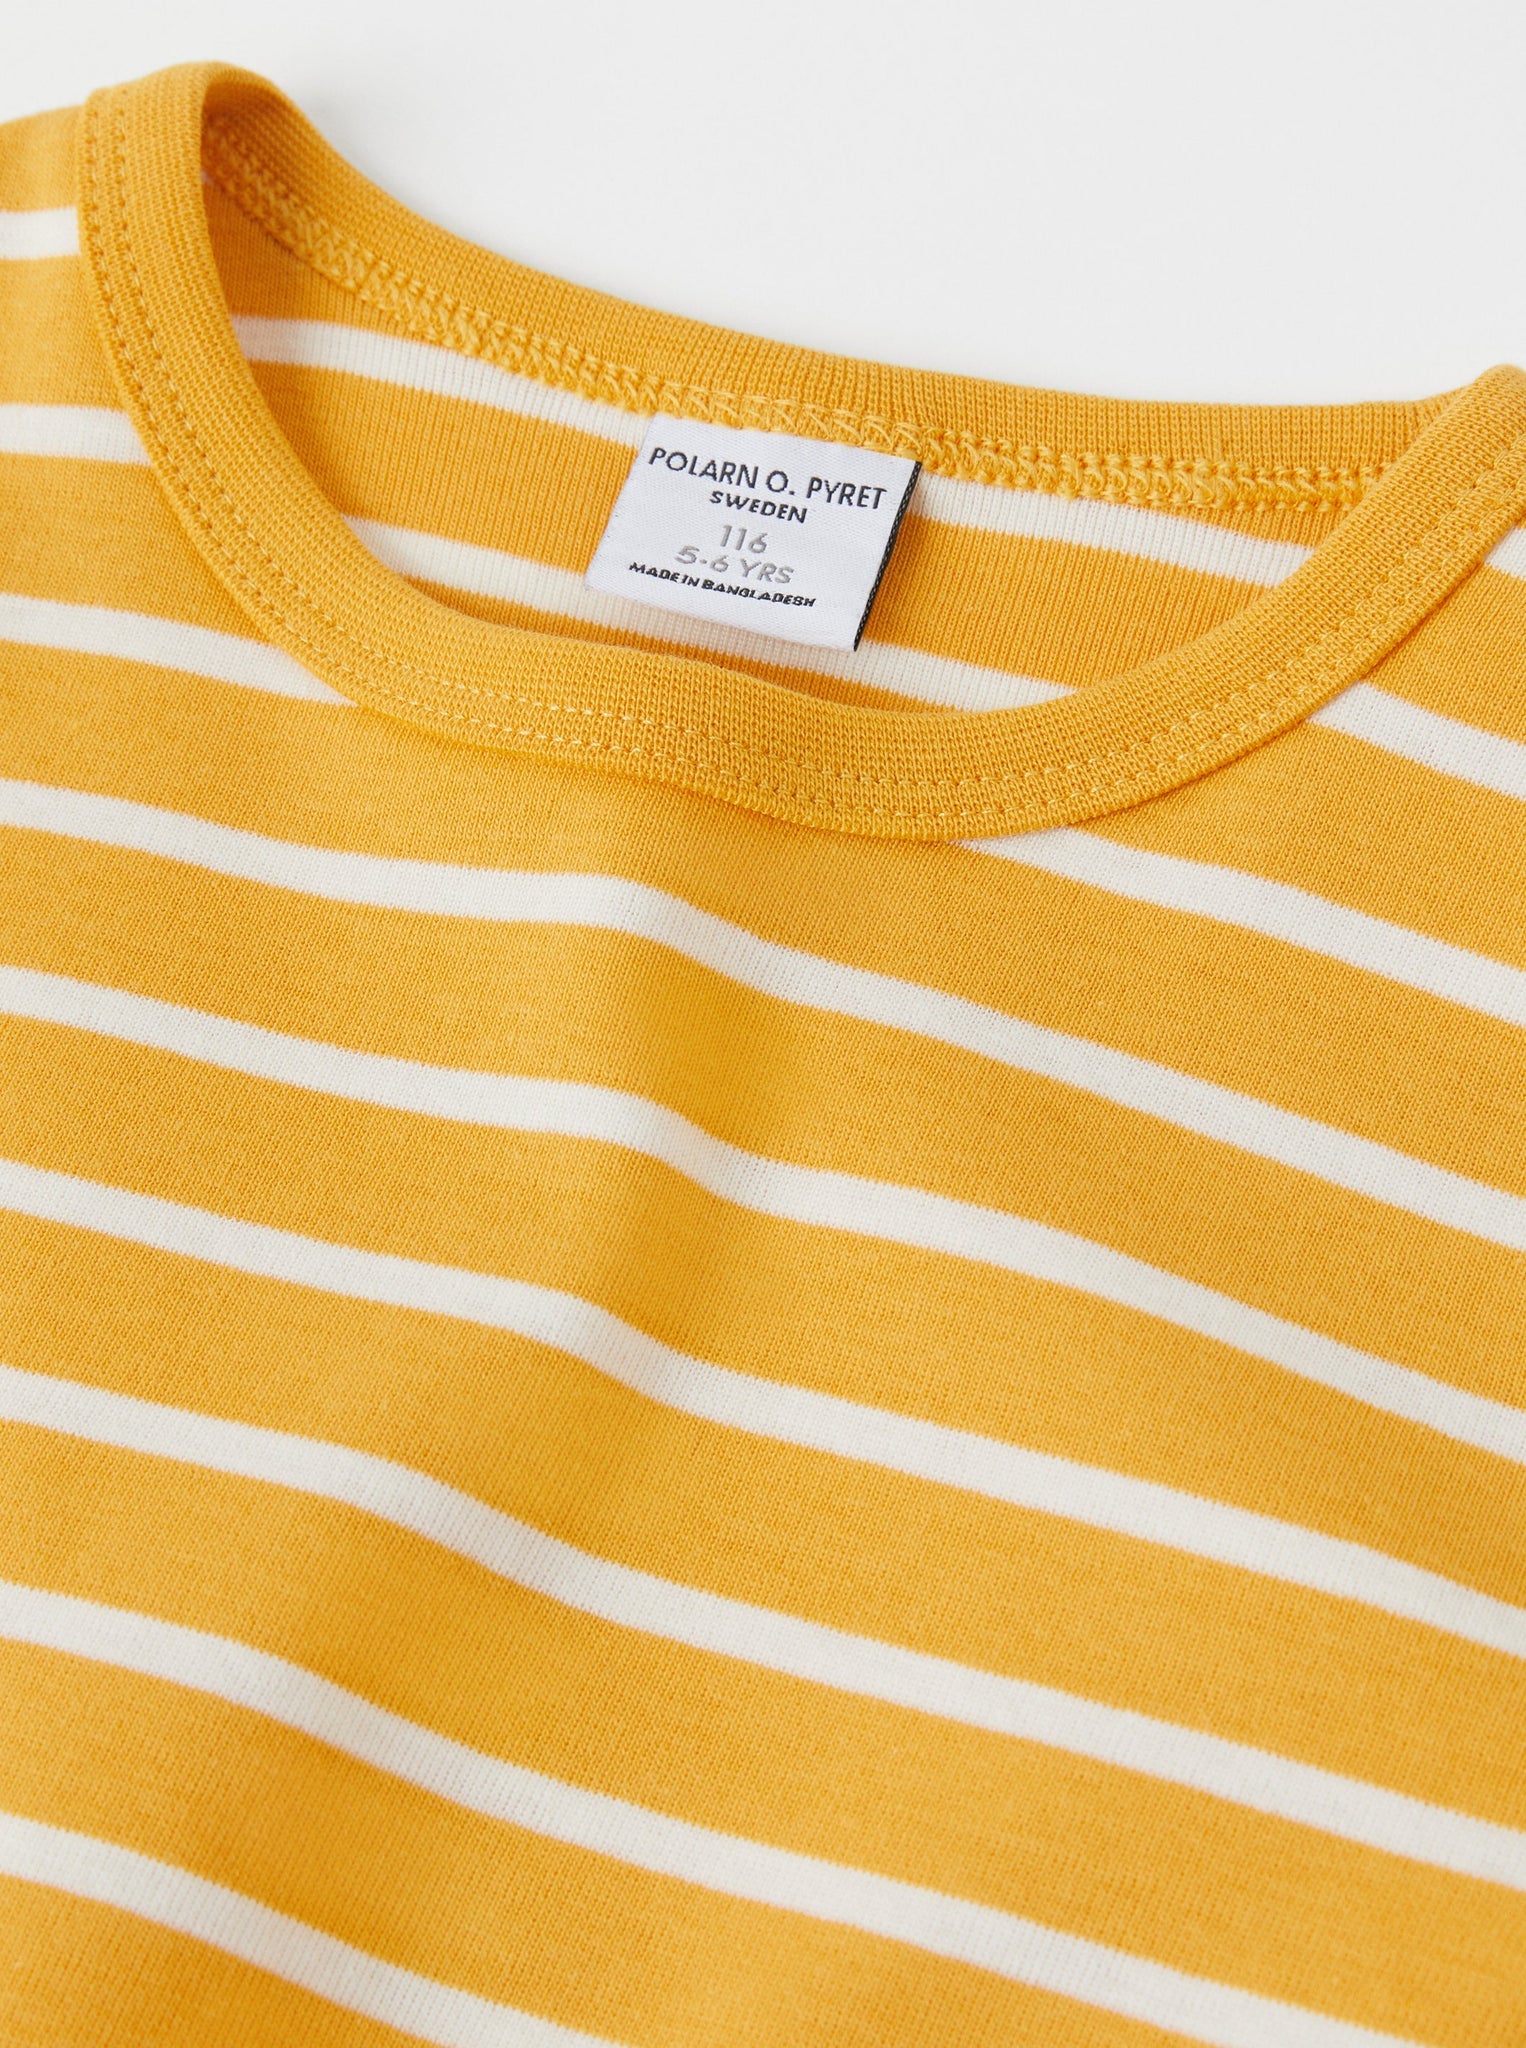 Striped Organic Cotton Yellow Kids Top from the Polarn O. Pyret kidswear collection. Clothes made using sustainably sourced materials.